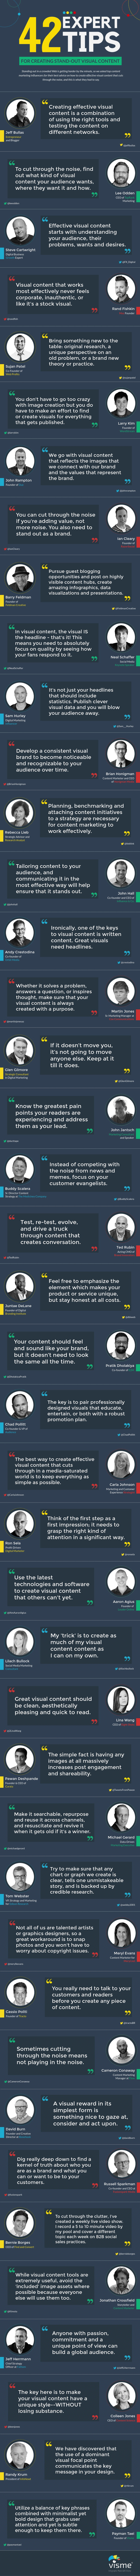 42-expert-tips-for-creating-stand-out-content-infographic